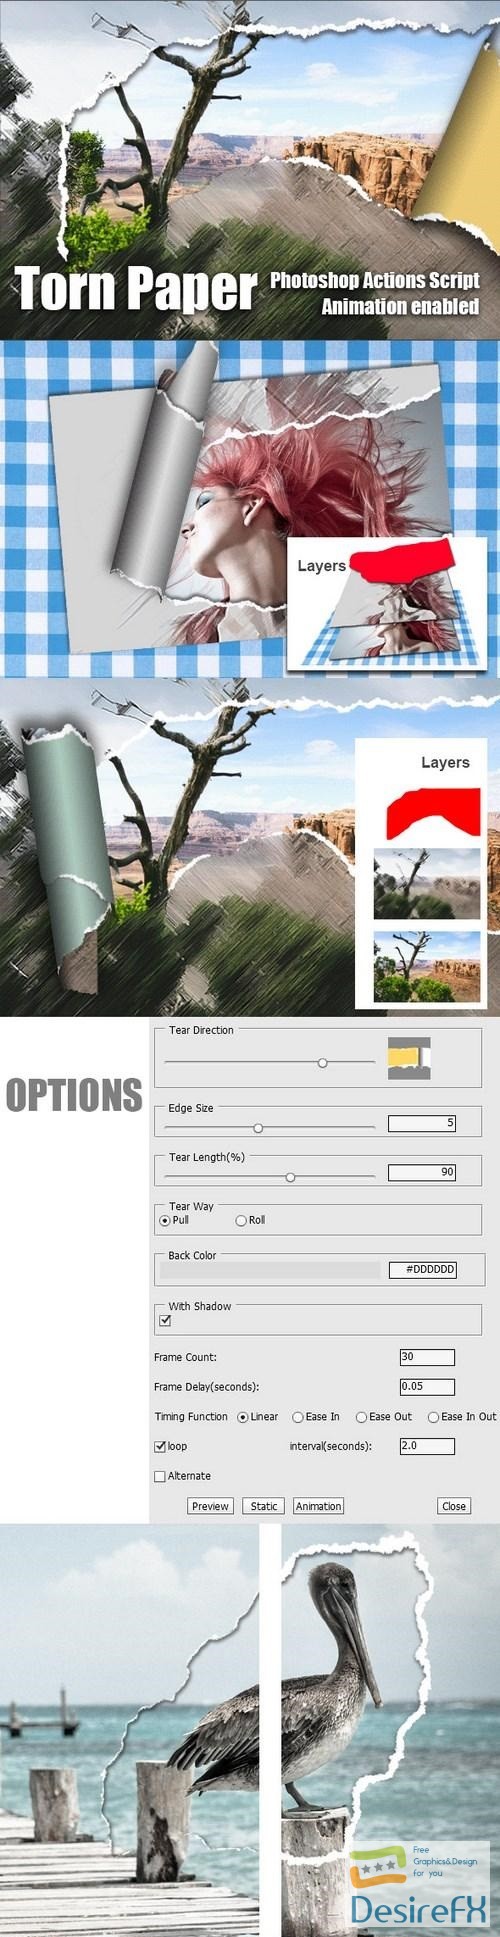 Graphicriver 20572901 Torn Paper Animation Photoshop Add-on